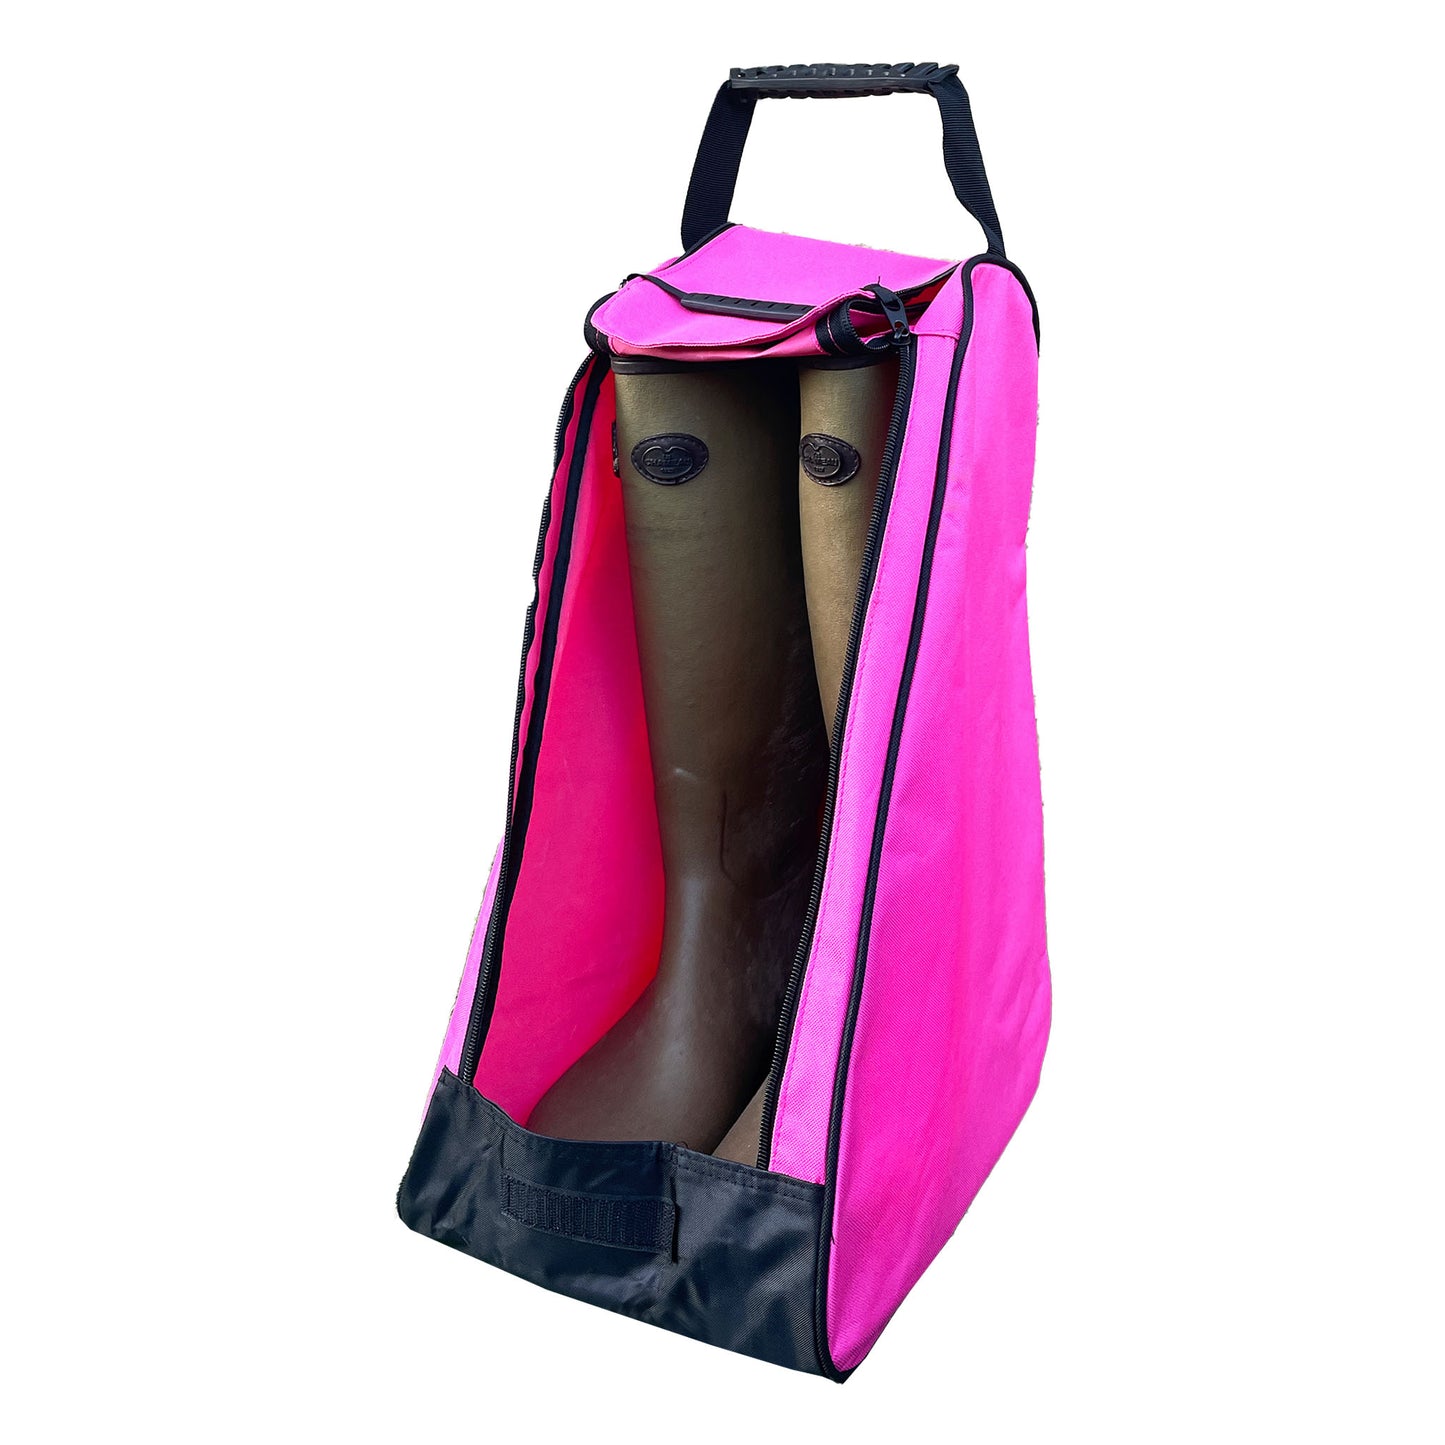 Embroidered Welly boot bag (Pink)